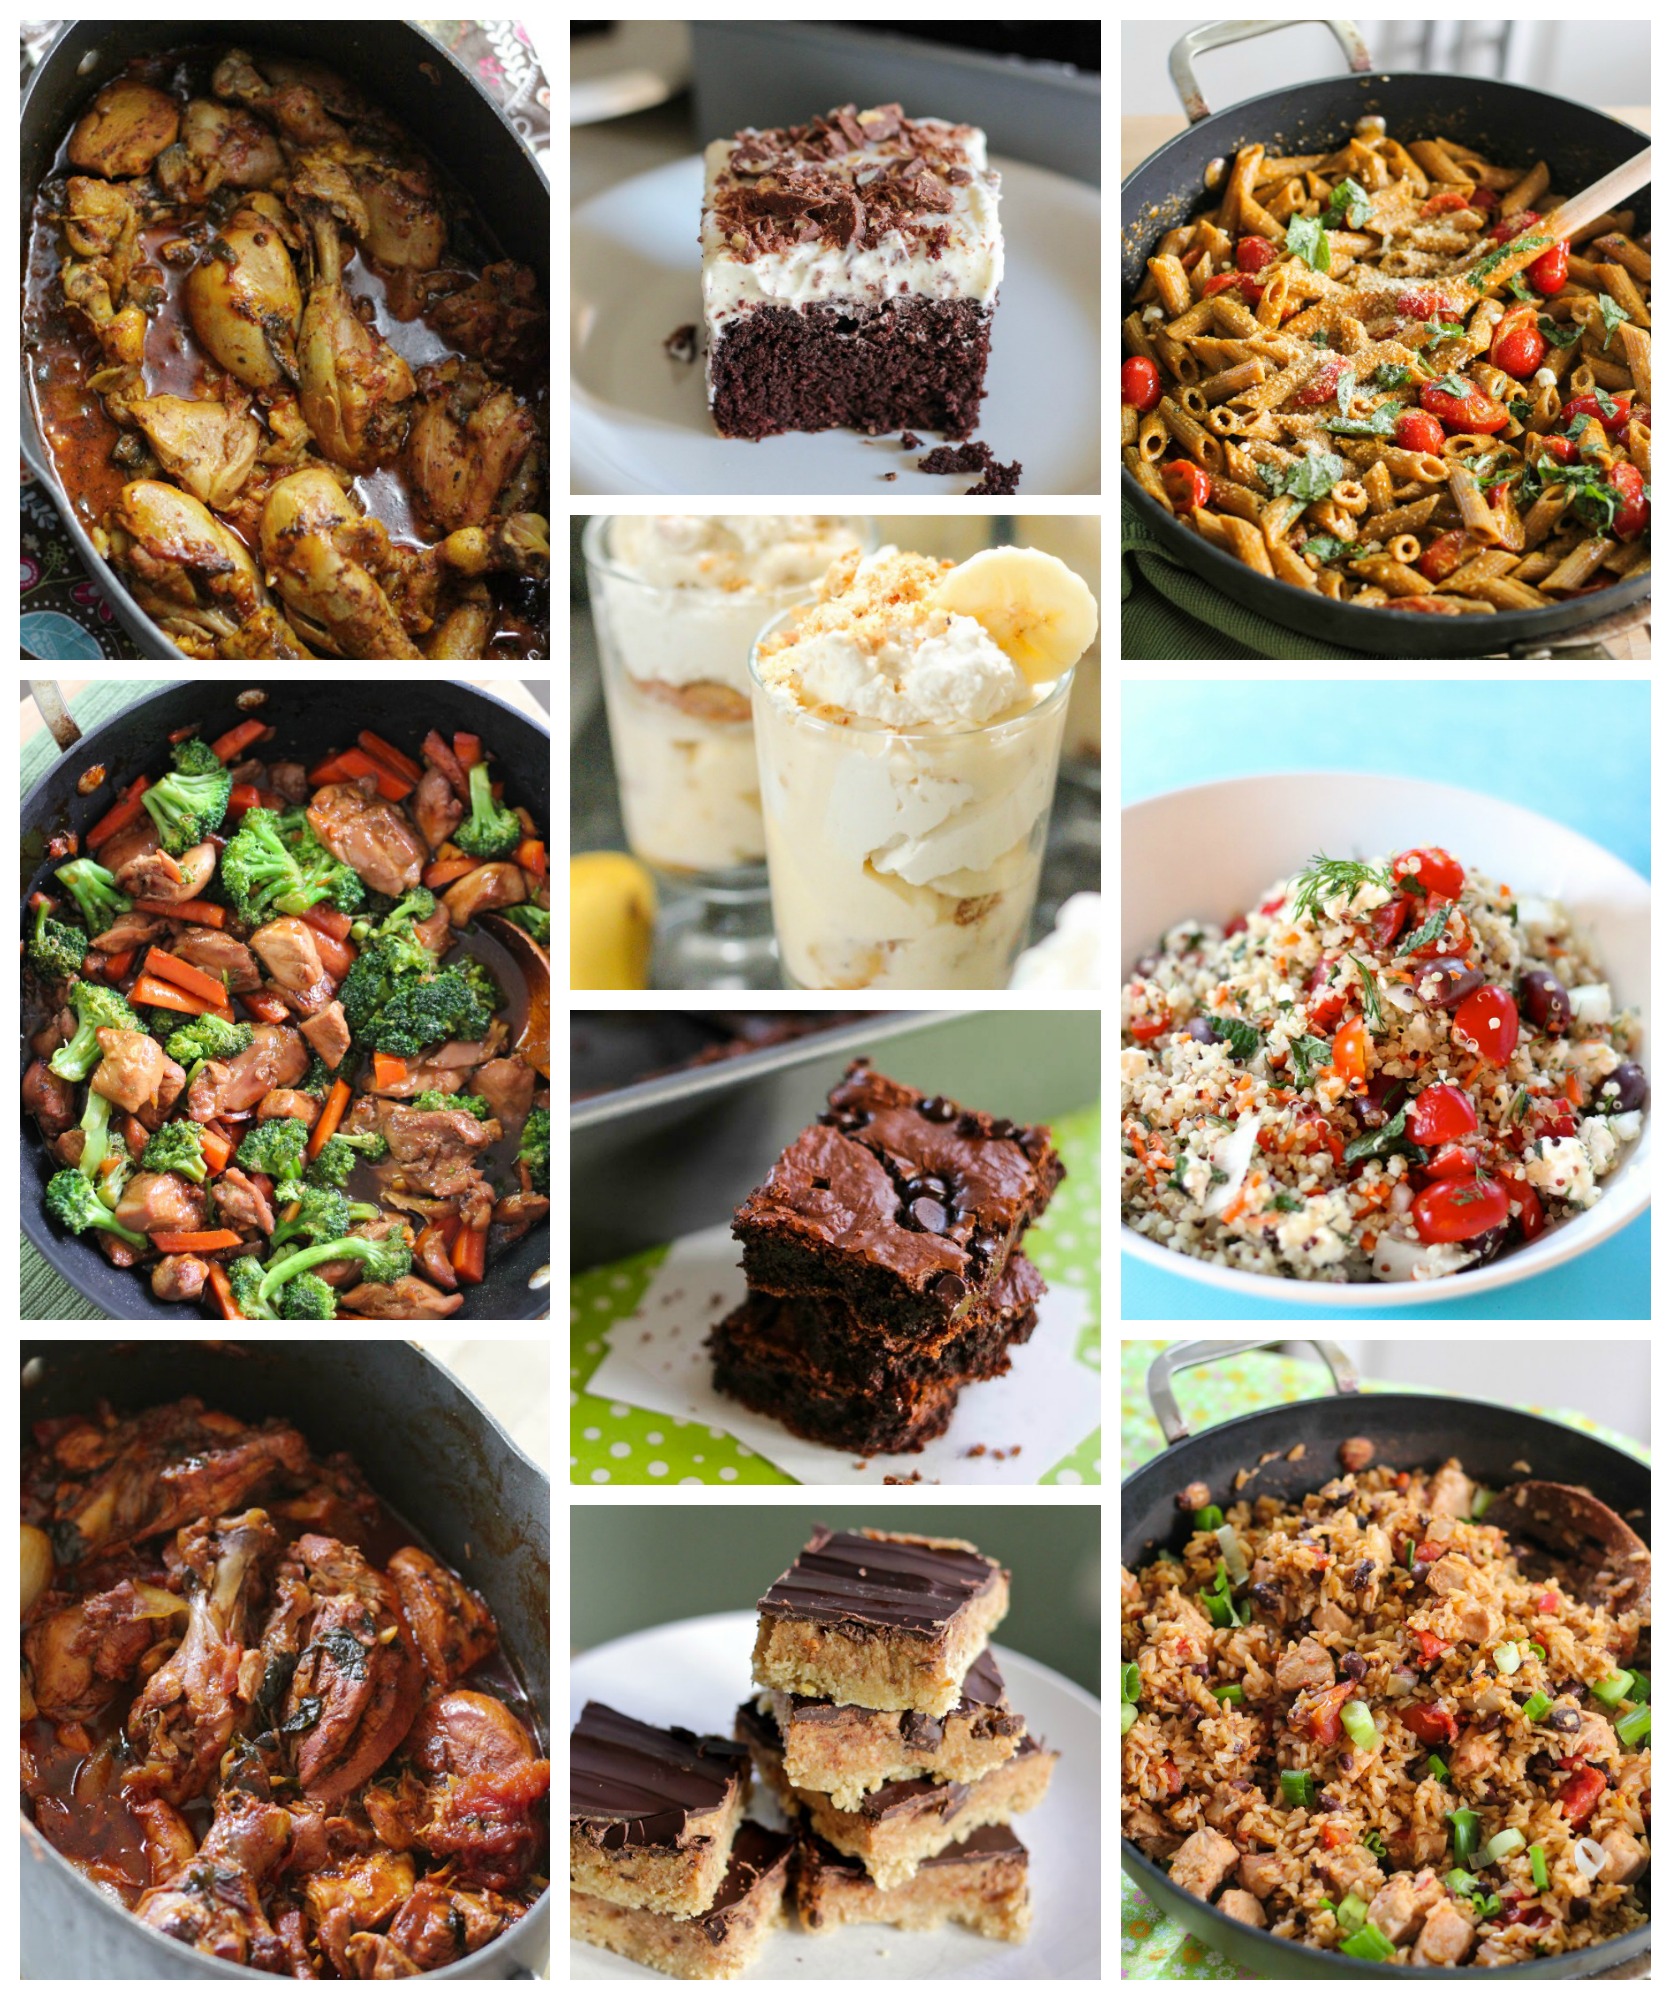 Top 10 recipes from 2013 | Eat Good 4 Life